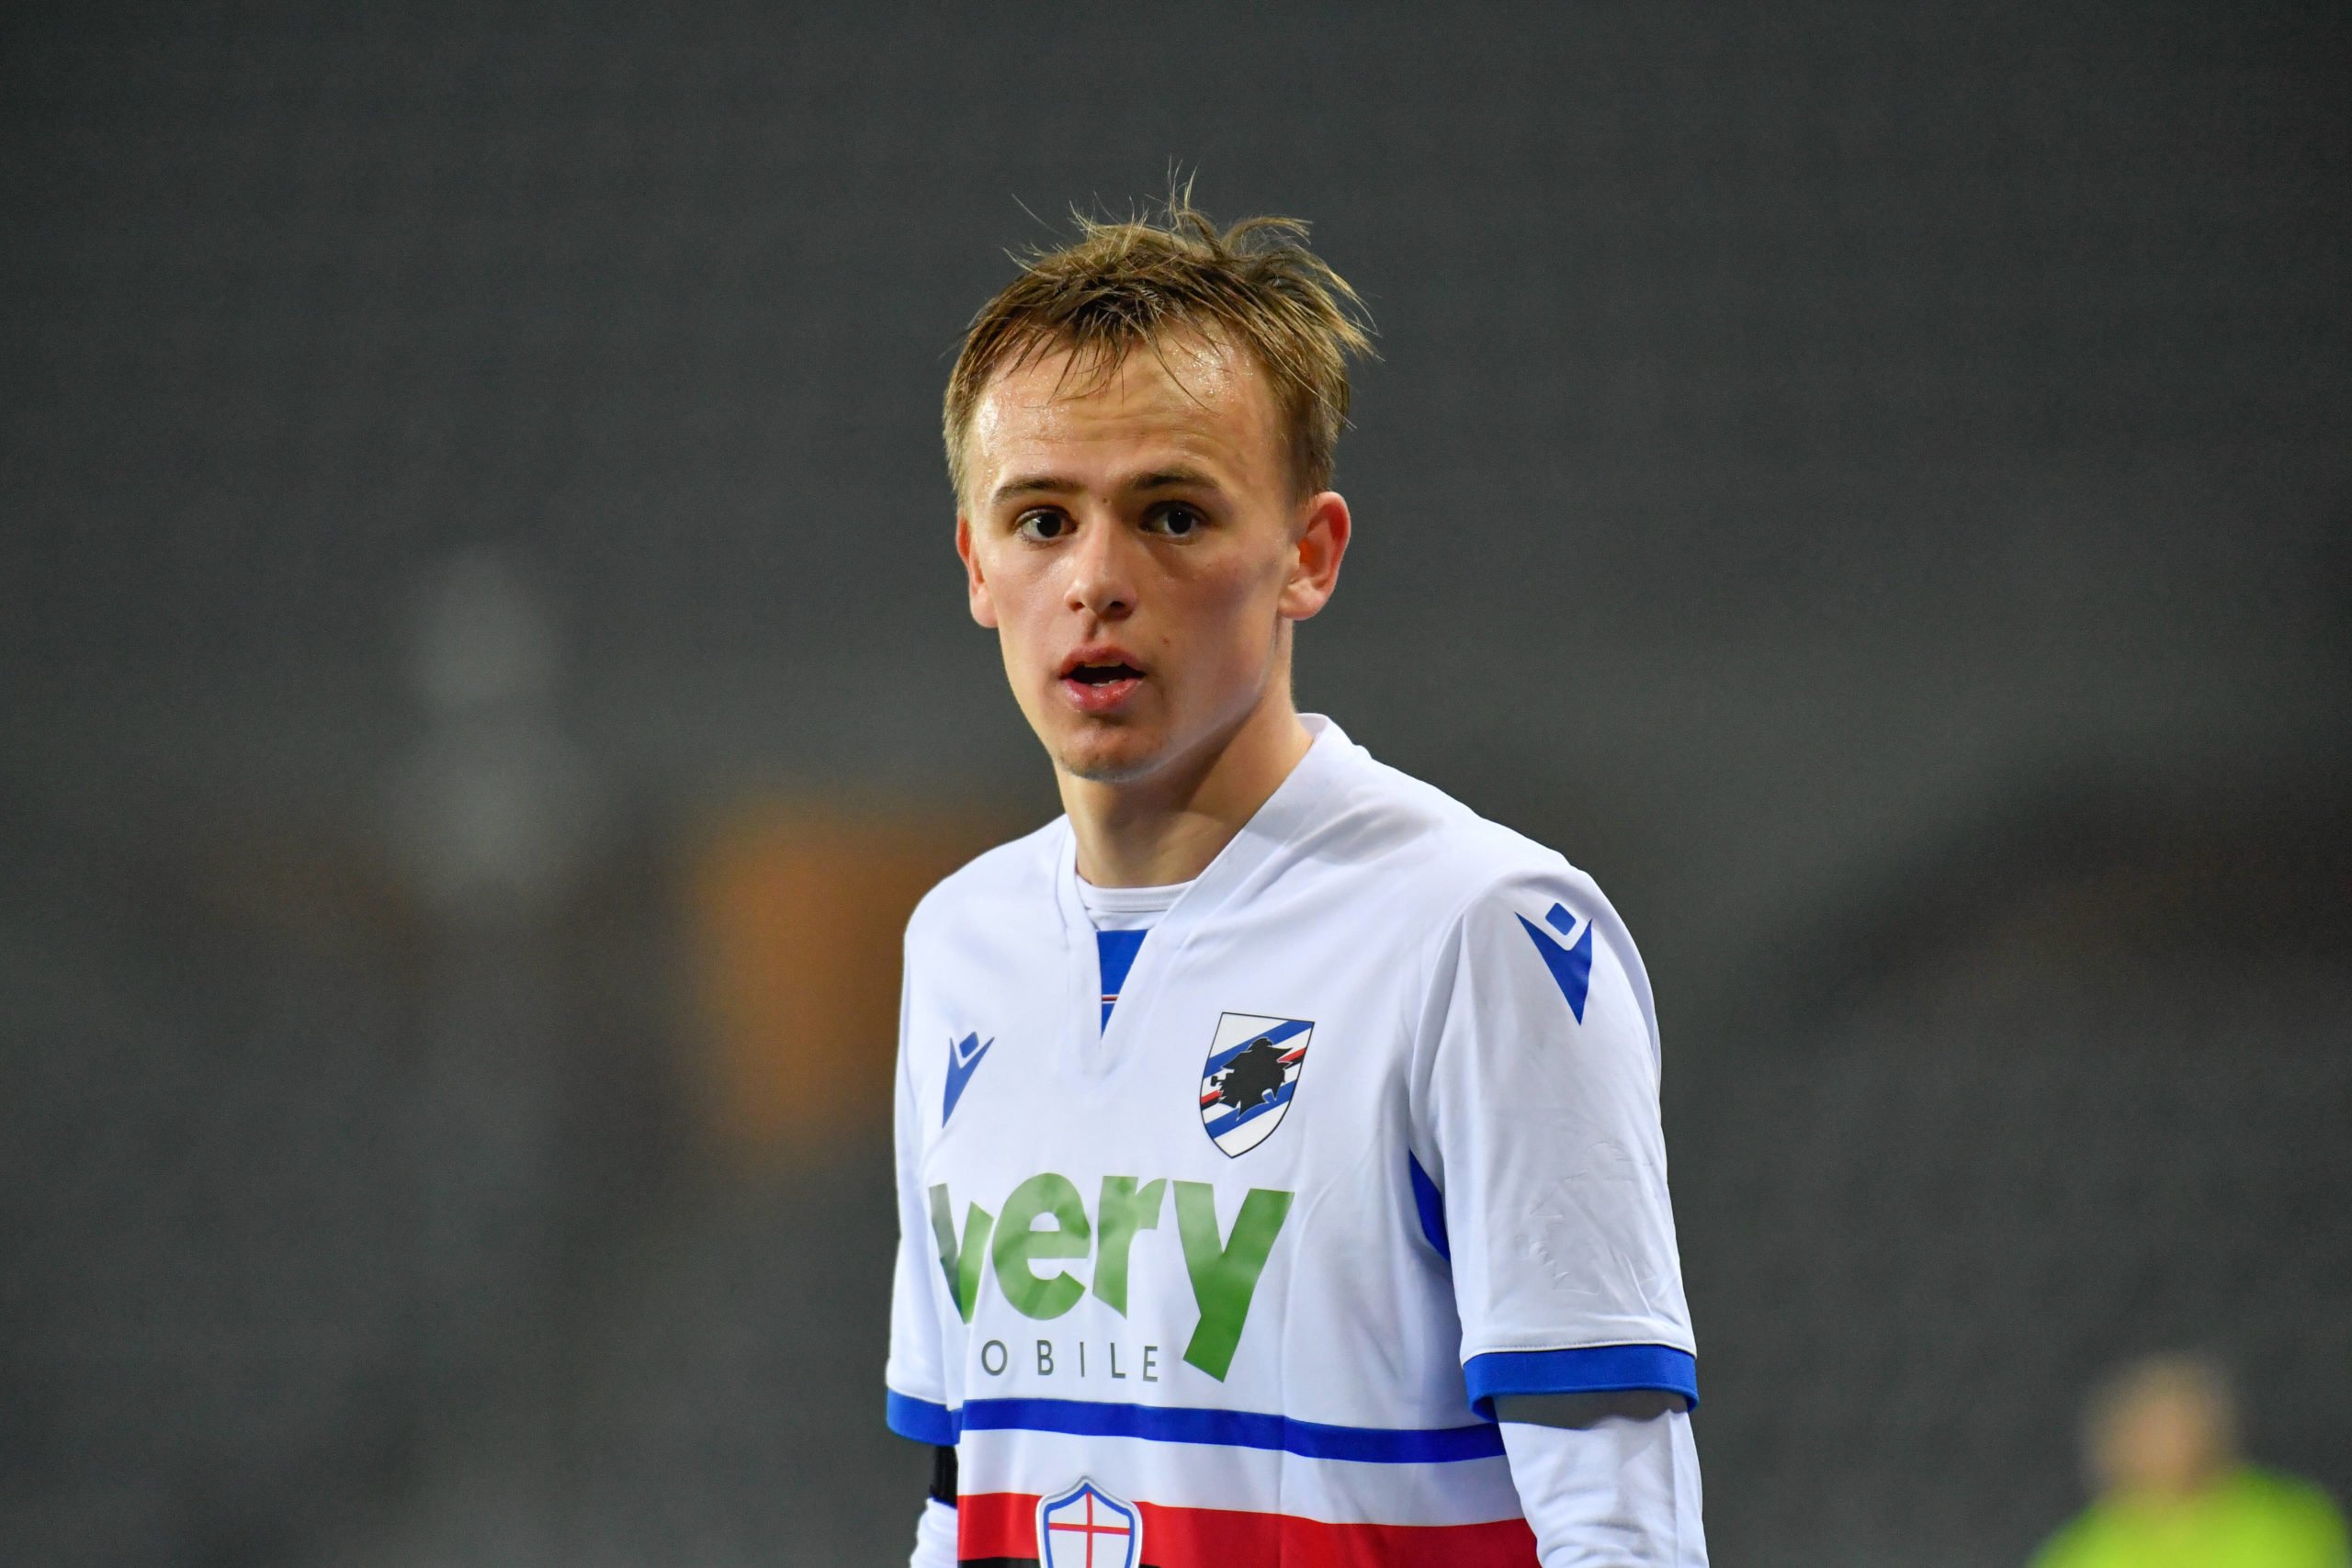 Leeds United are among clubs interested in Mikkel Damsgaard - One for the future.